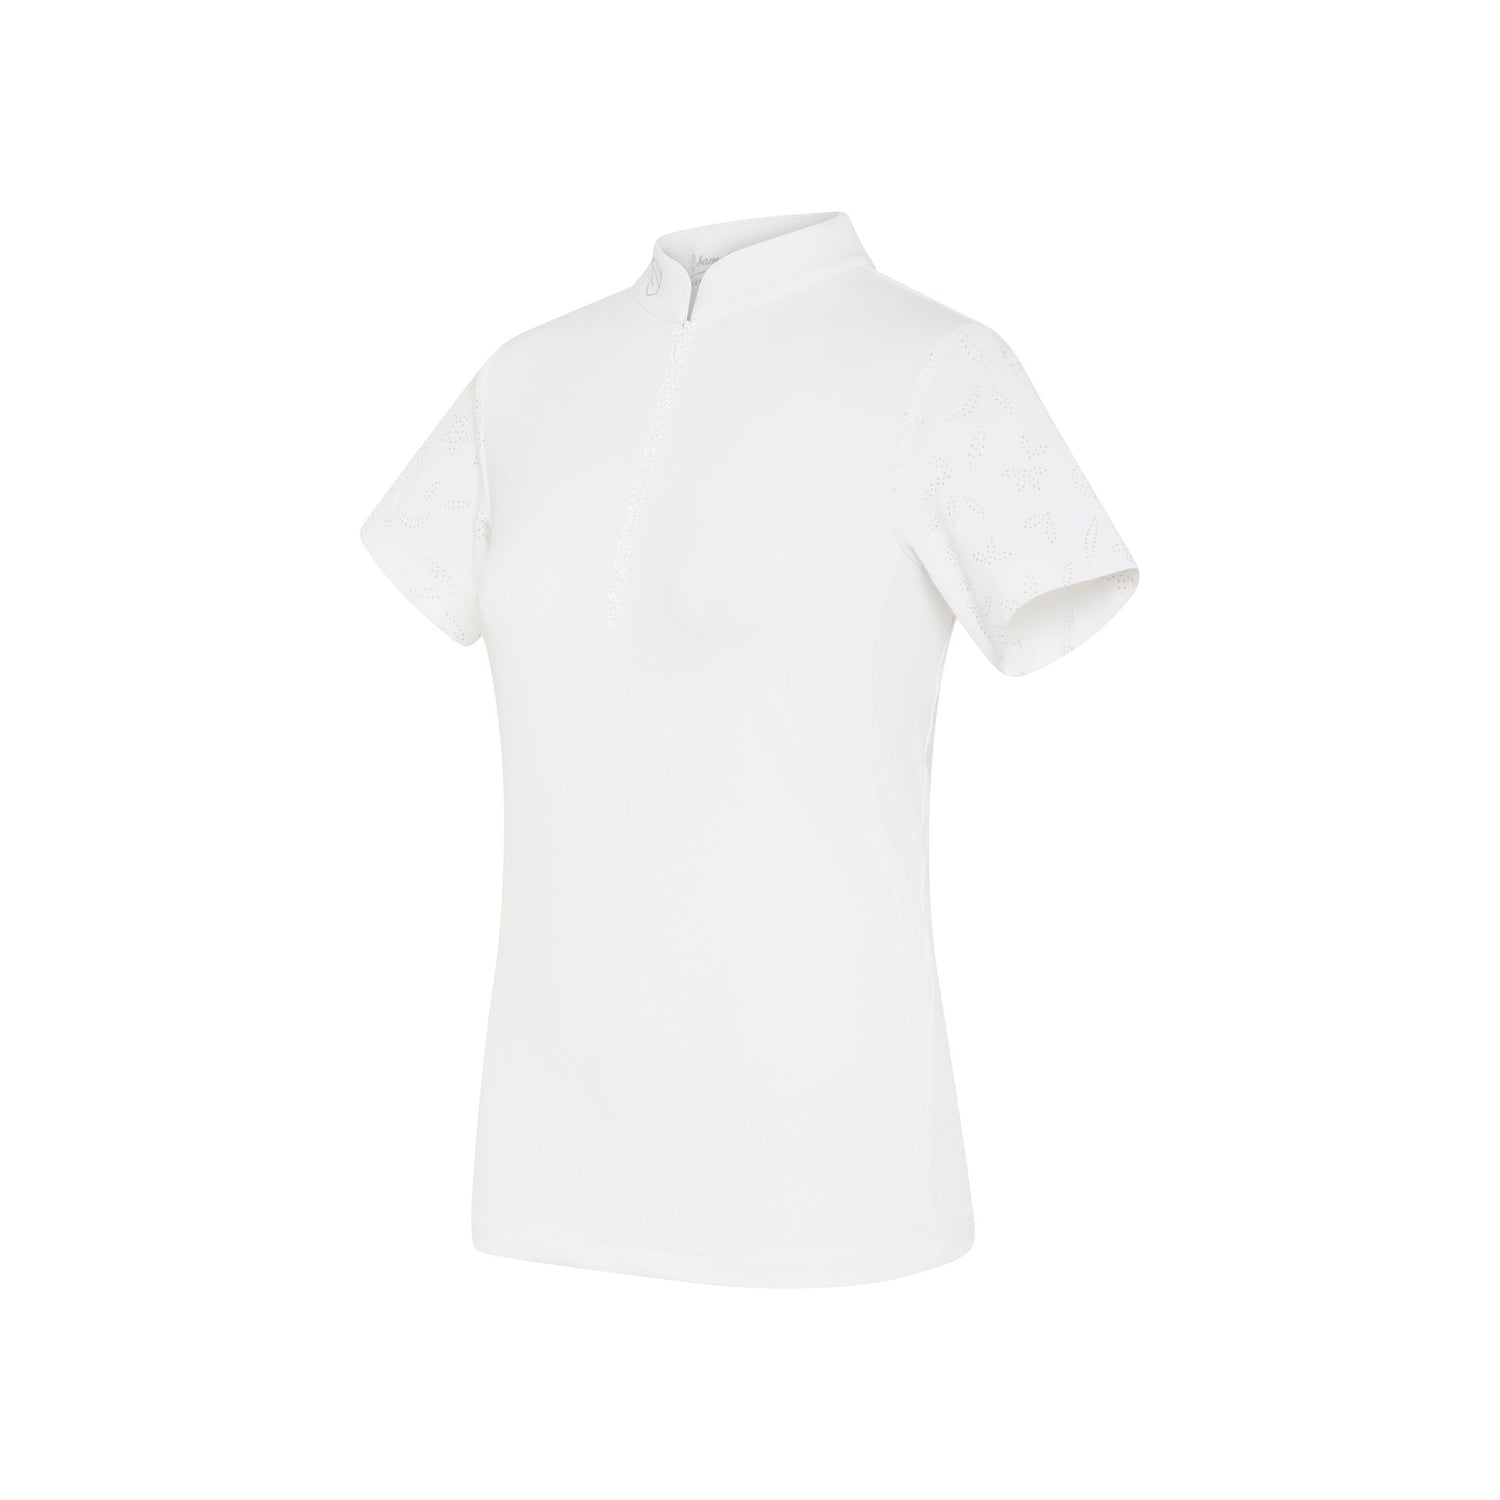 The Aloise short sleeve shirt is an a favourite thanks to it&